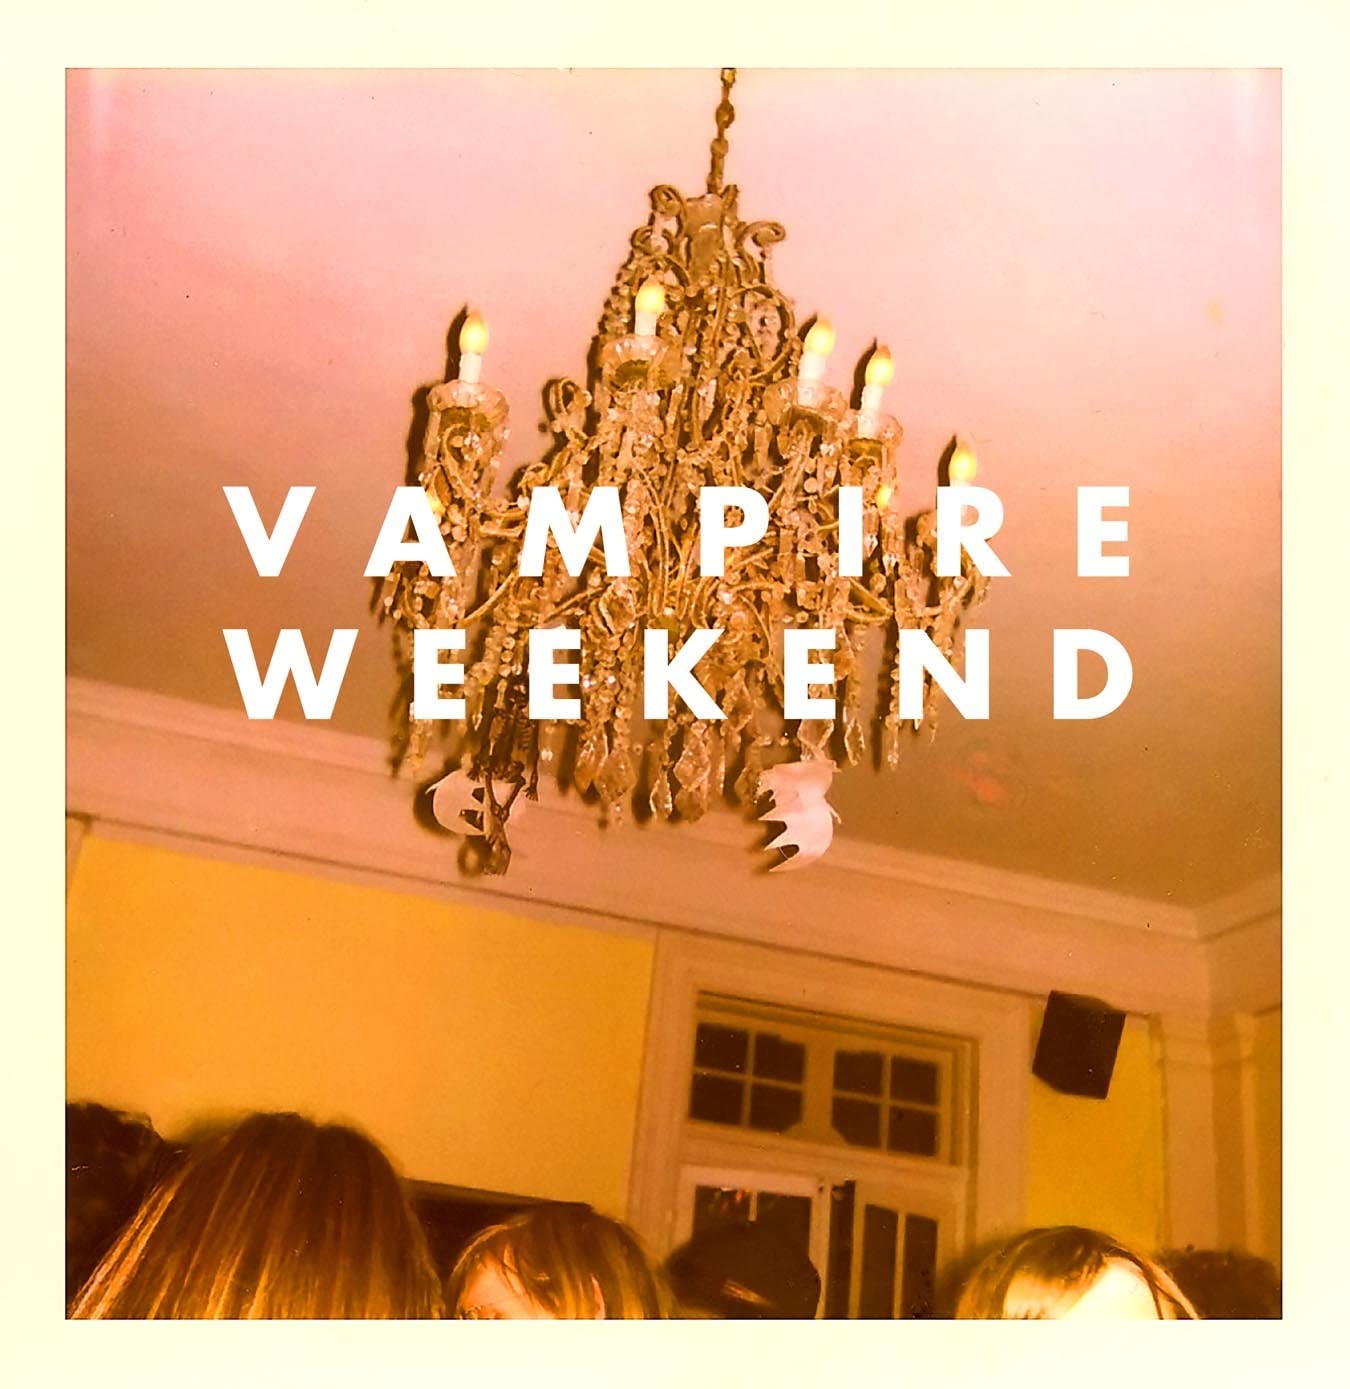 Debut album on Vinyl from the beloved Vampire weekend featuring Oxford comma & A-Punk.